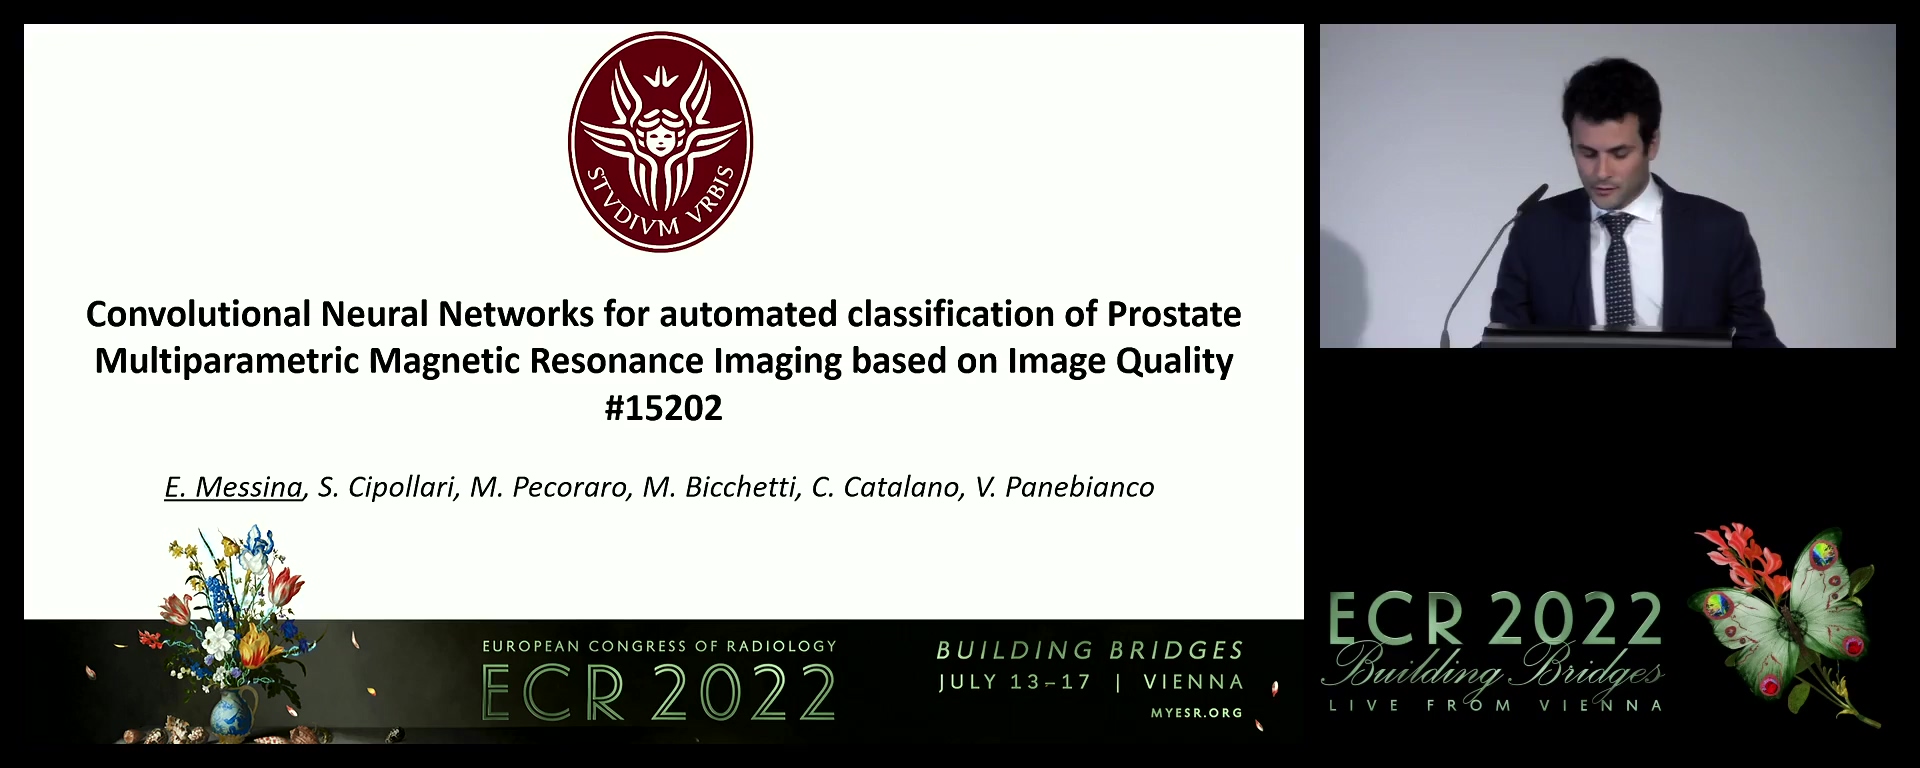 Convolutional neural networks for automated classification of prostate multiparametric magnetic resonance imaging based on image quality - Emanuele Messina, Rome / IT